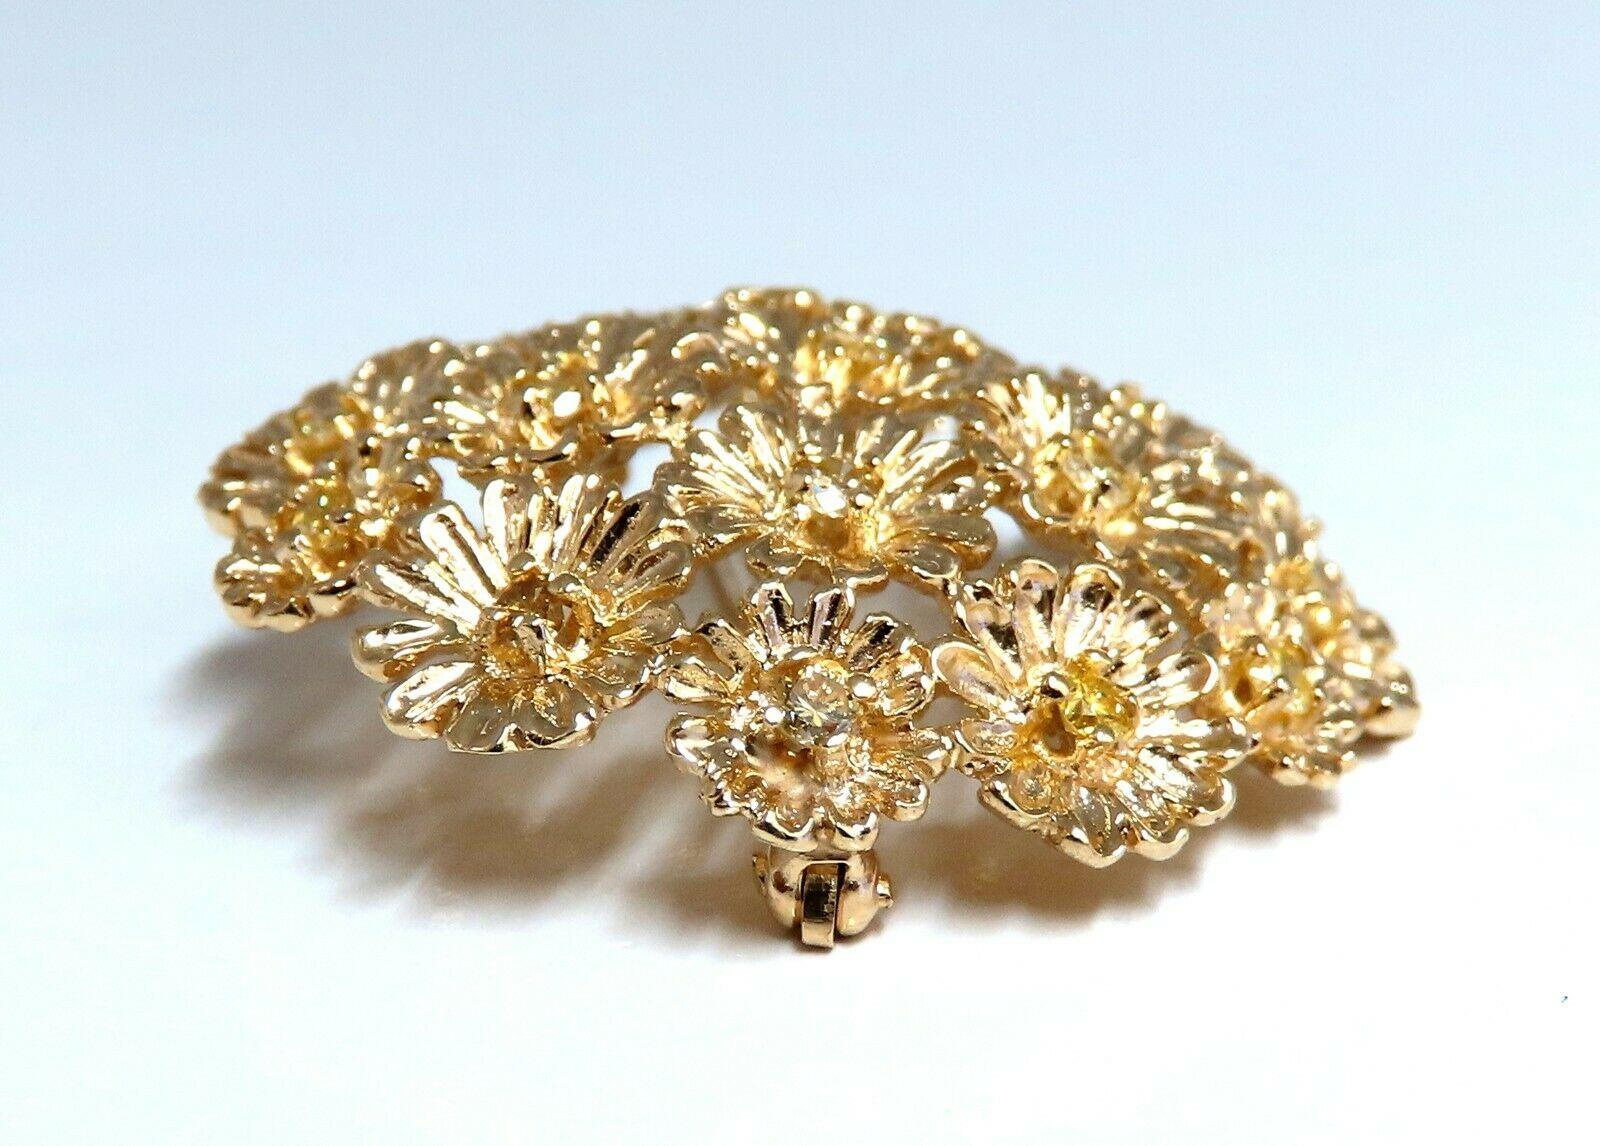 1.00ct. diamonds dandelion brooch pin.

Rounds, Full cut Brilliant.

Fancy Yellow colors, Si-1  clarity.

14kt yellow gold 

10.7 grams.

Overall: 1.35 inch

Excellent made 